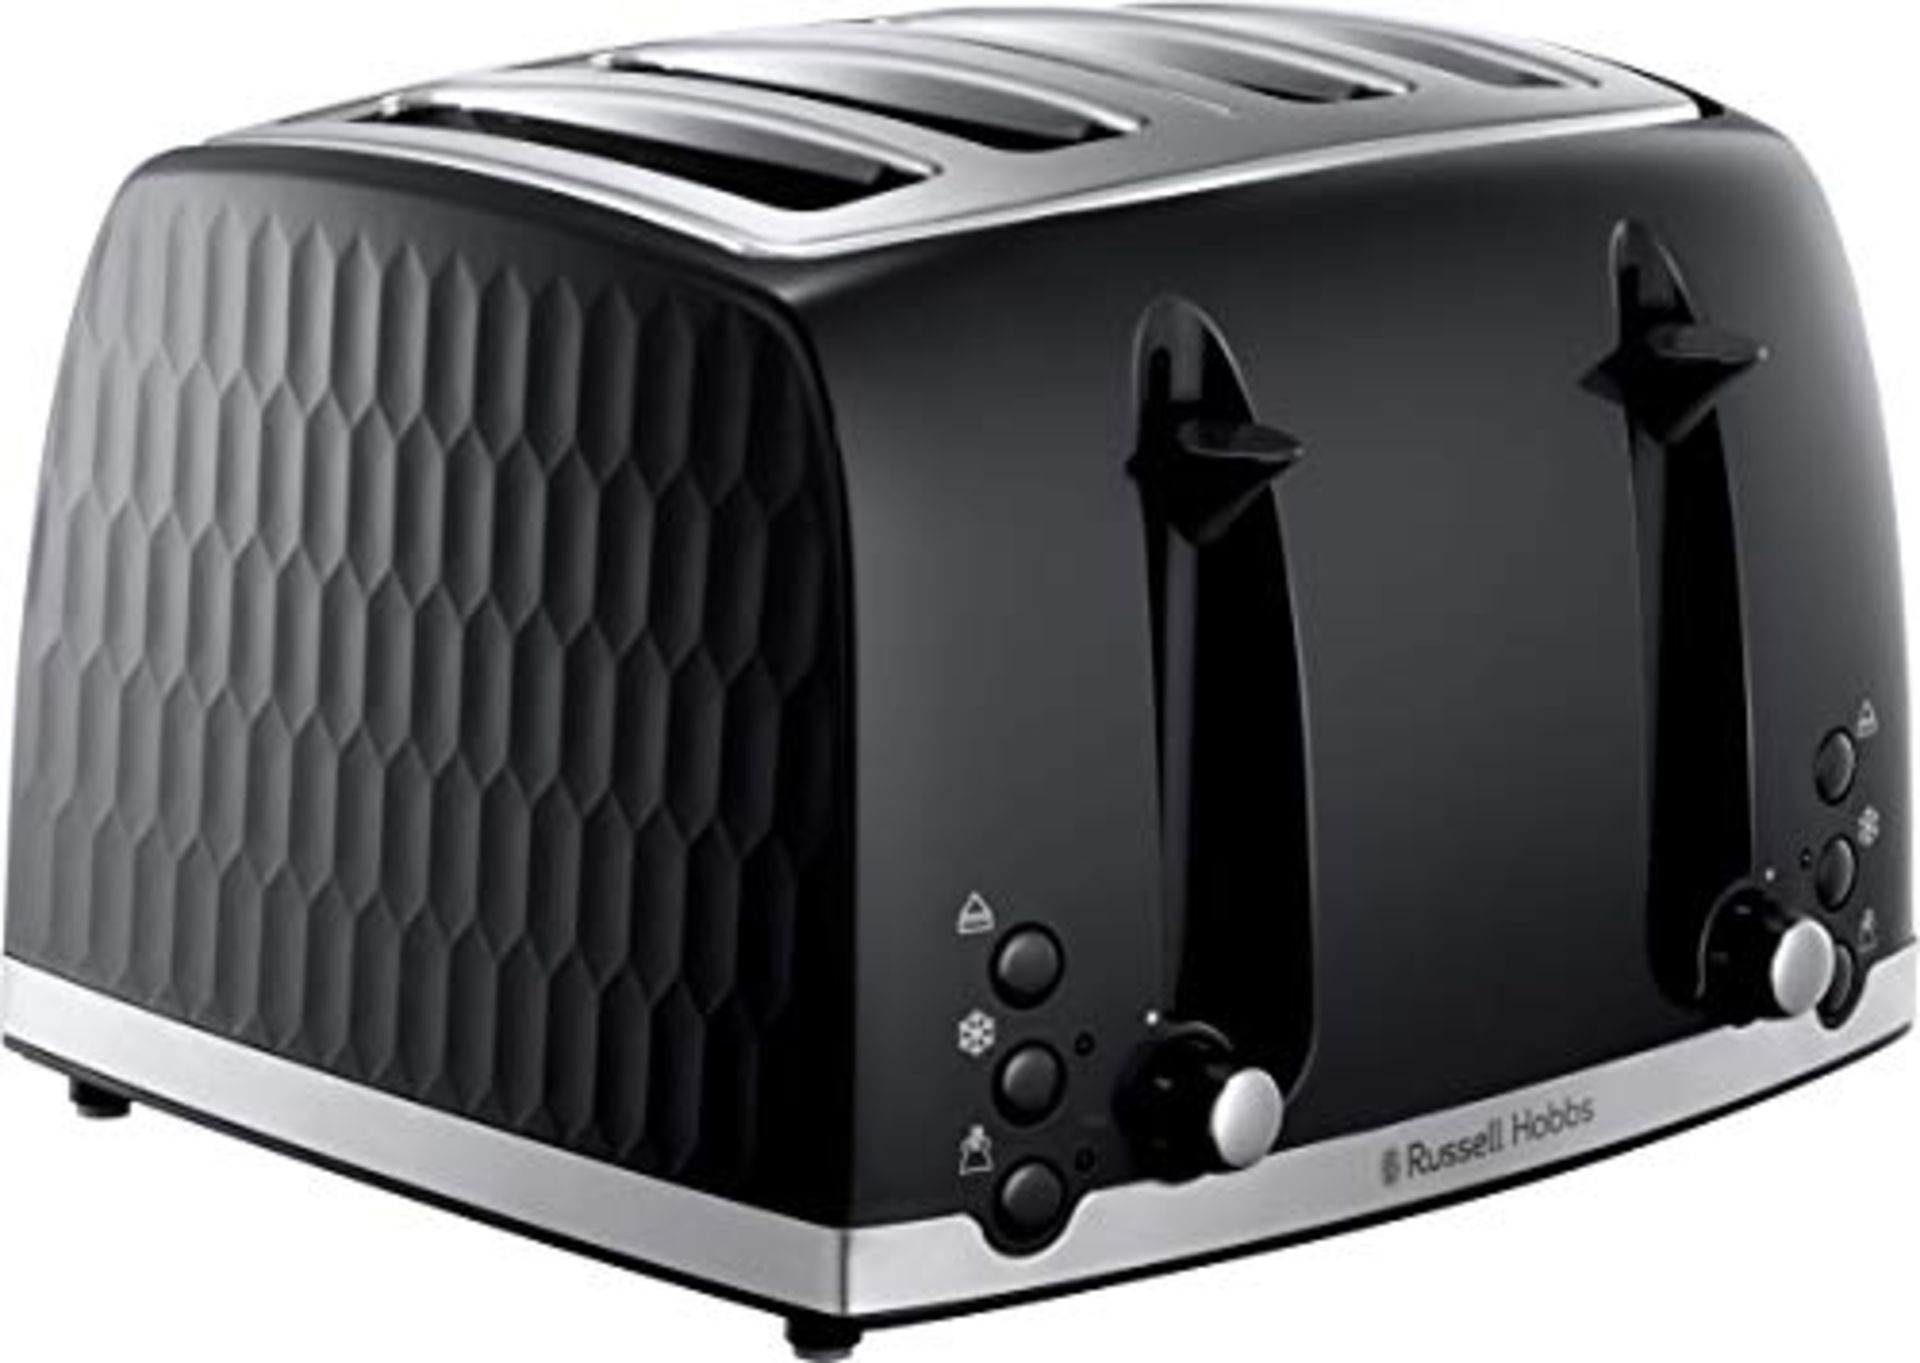 Russell Hobbs 26071 4 Slice Toaster - Contemporary Honeycomb Design with Extra Wide Sl